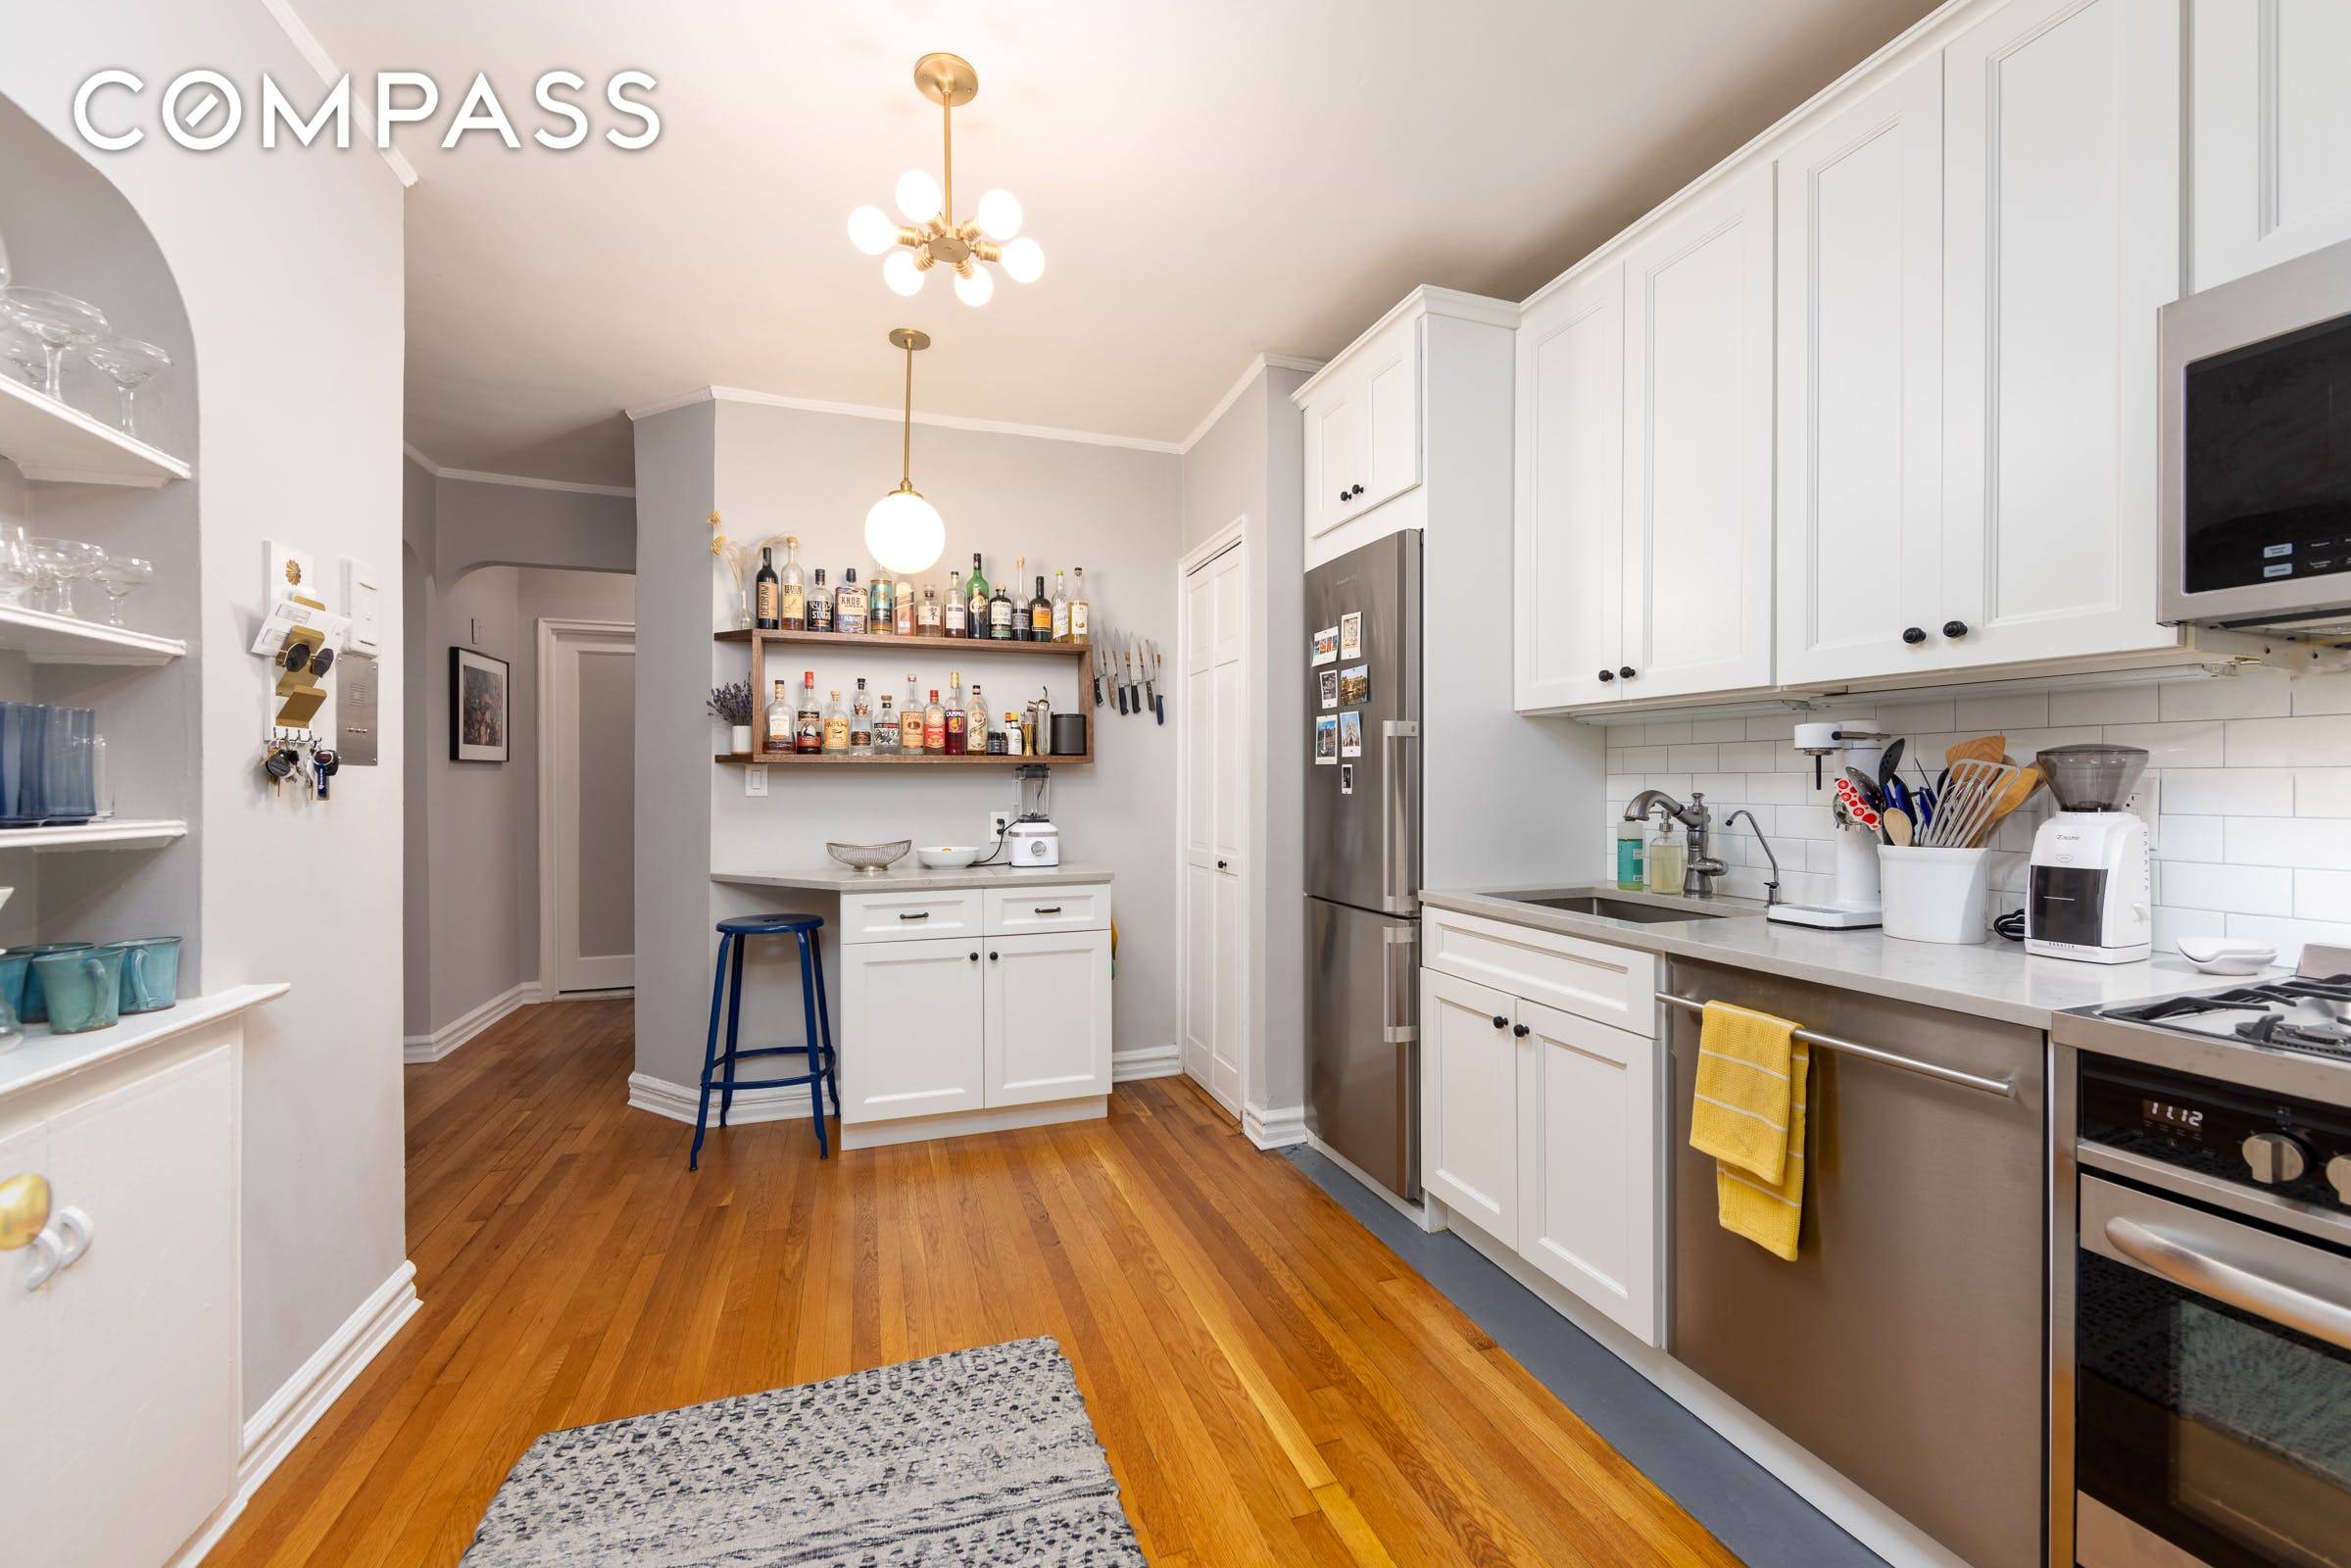 Recently renovated spacious One bedroom apartment available in beautiful tree lined Ditmas Park neighborhood.